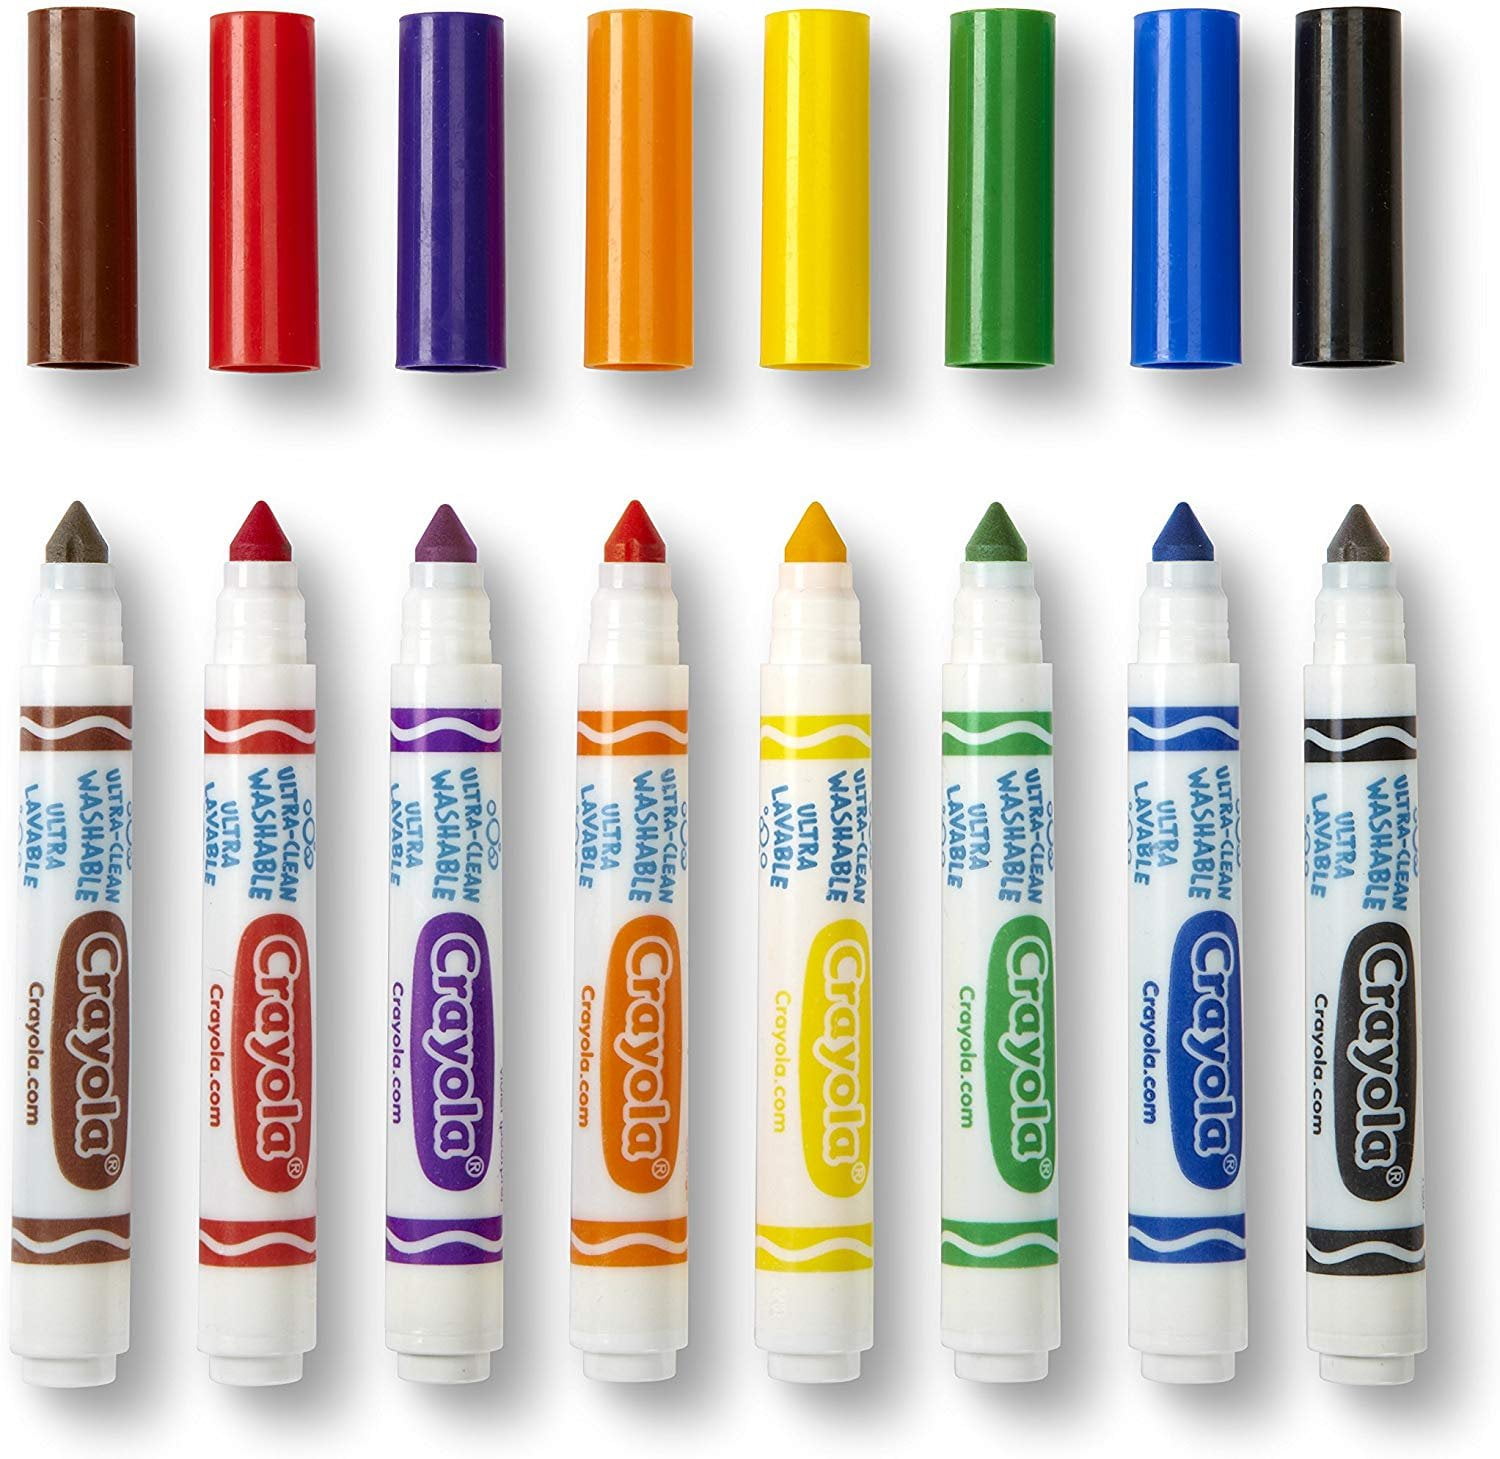 Crayola 58-7813 Washable Markers, Fine Point, Classic Colors, 12